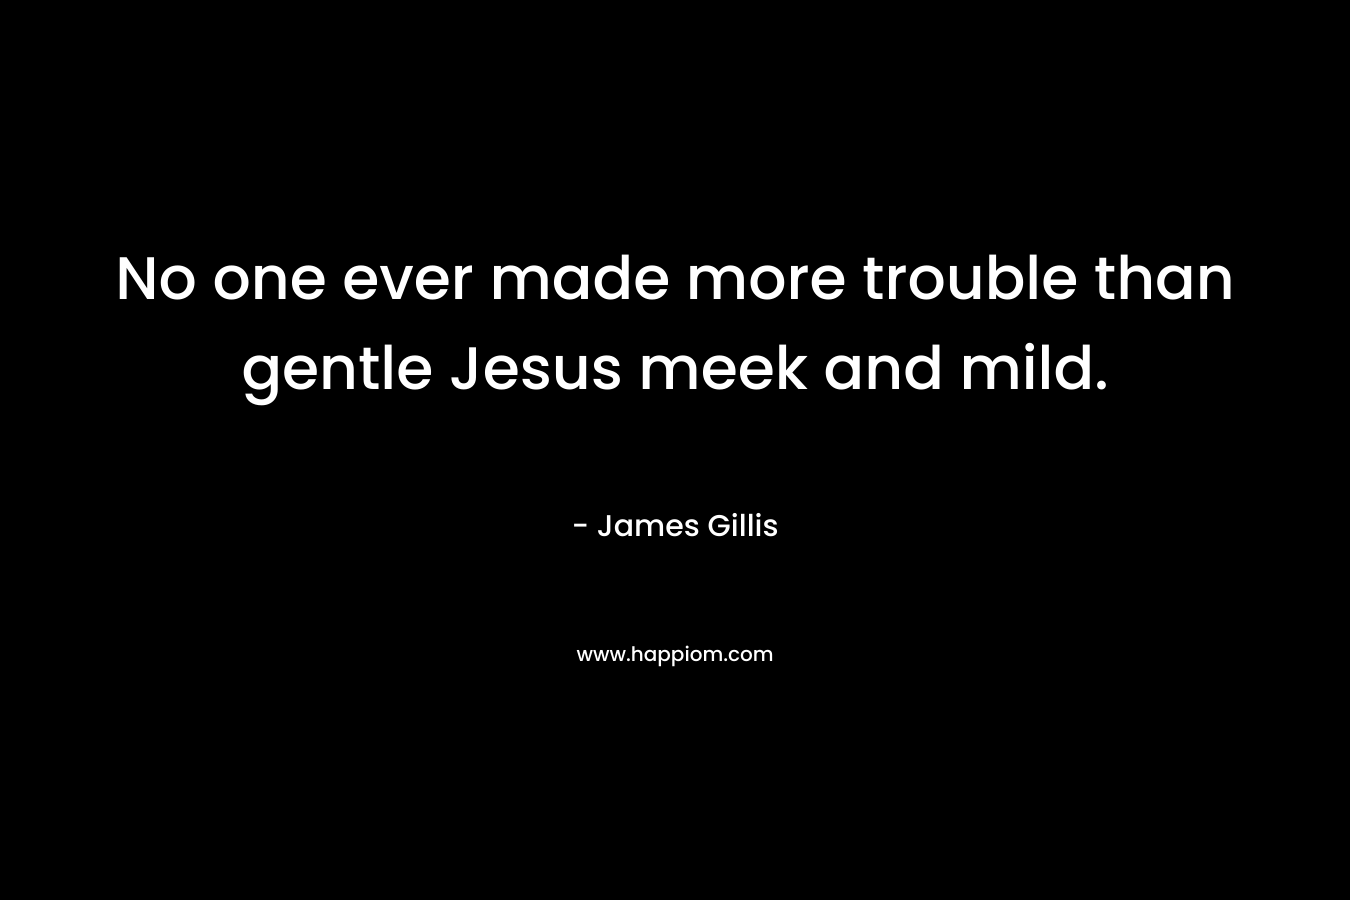 No one ever made more trouble than gentle Jesus meek and mild. – James Gillis